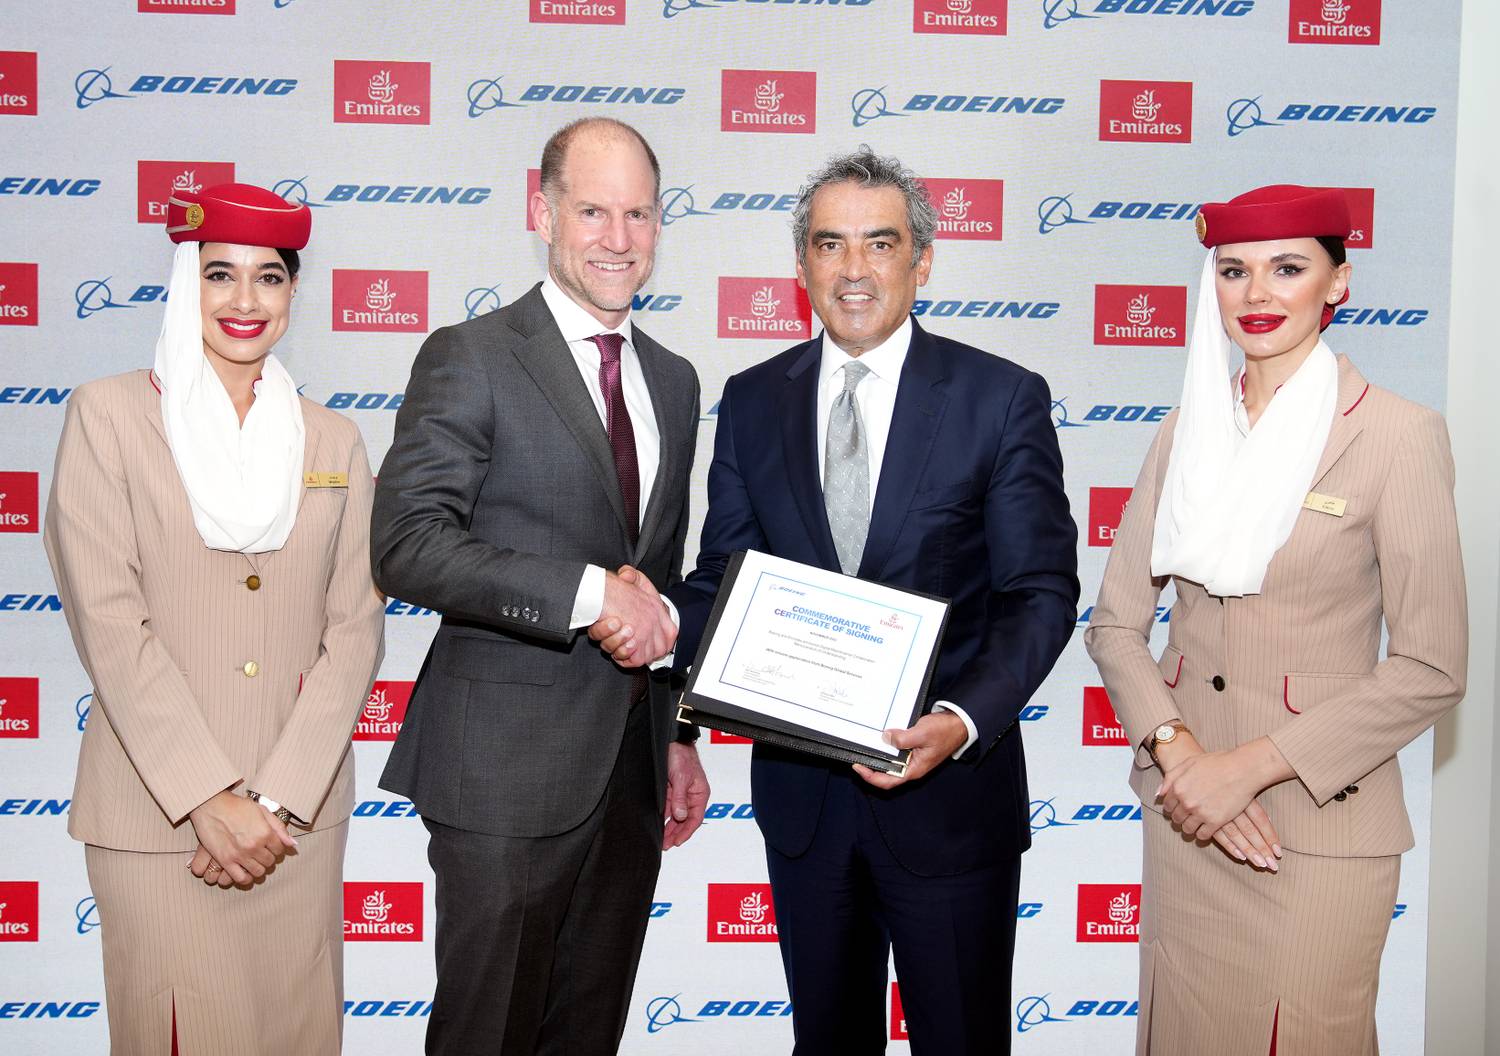 Emirates and Boeing sign drone MRO deal